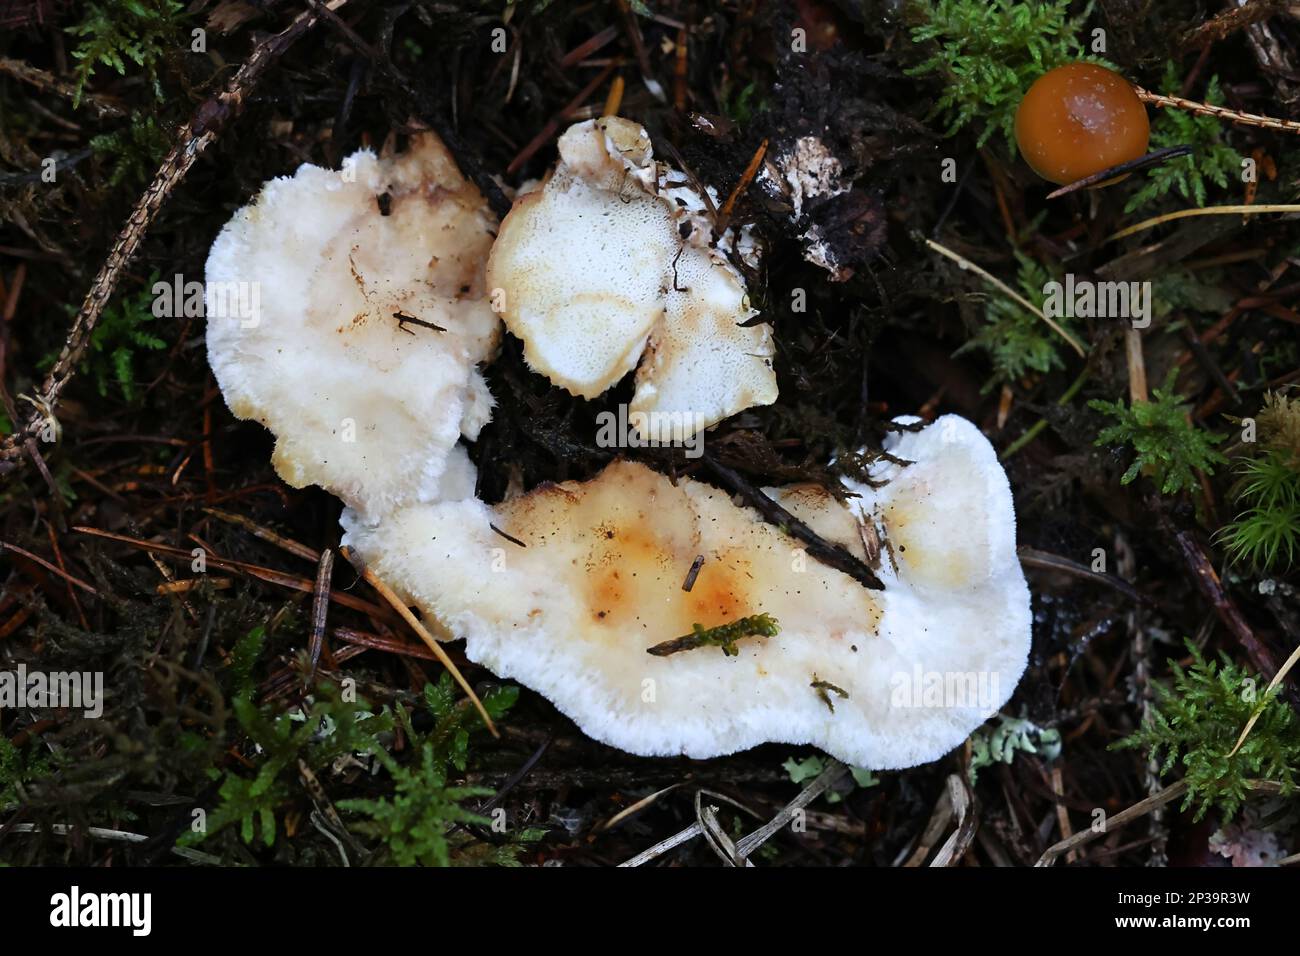 Postia fragilis, known as the Brown-staining Cheese Polypore, brown rot fungus from Finland Stock Photo